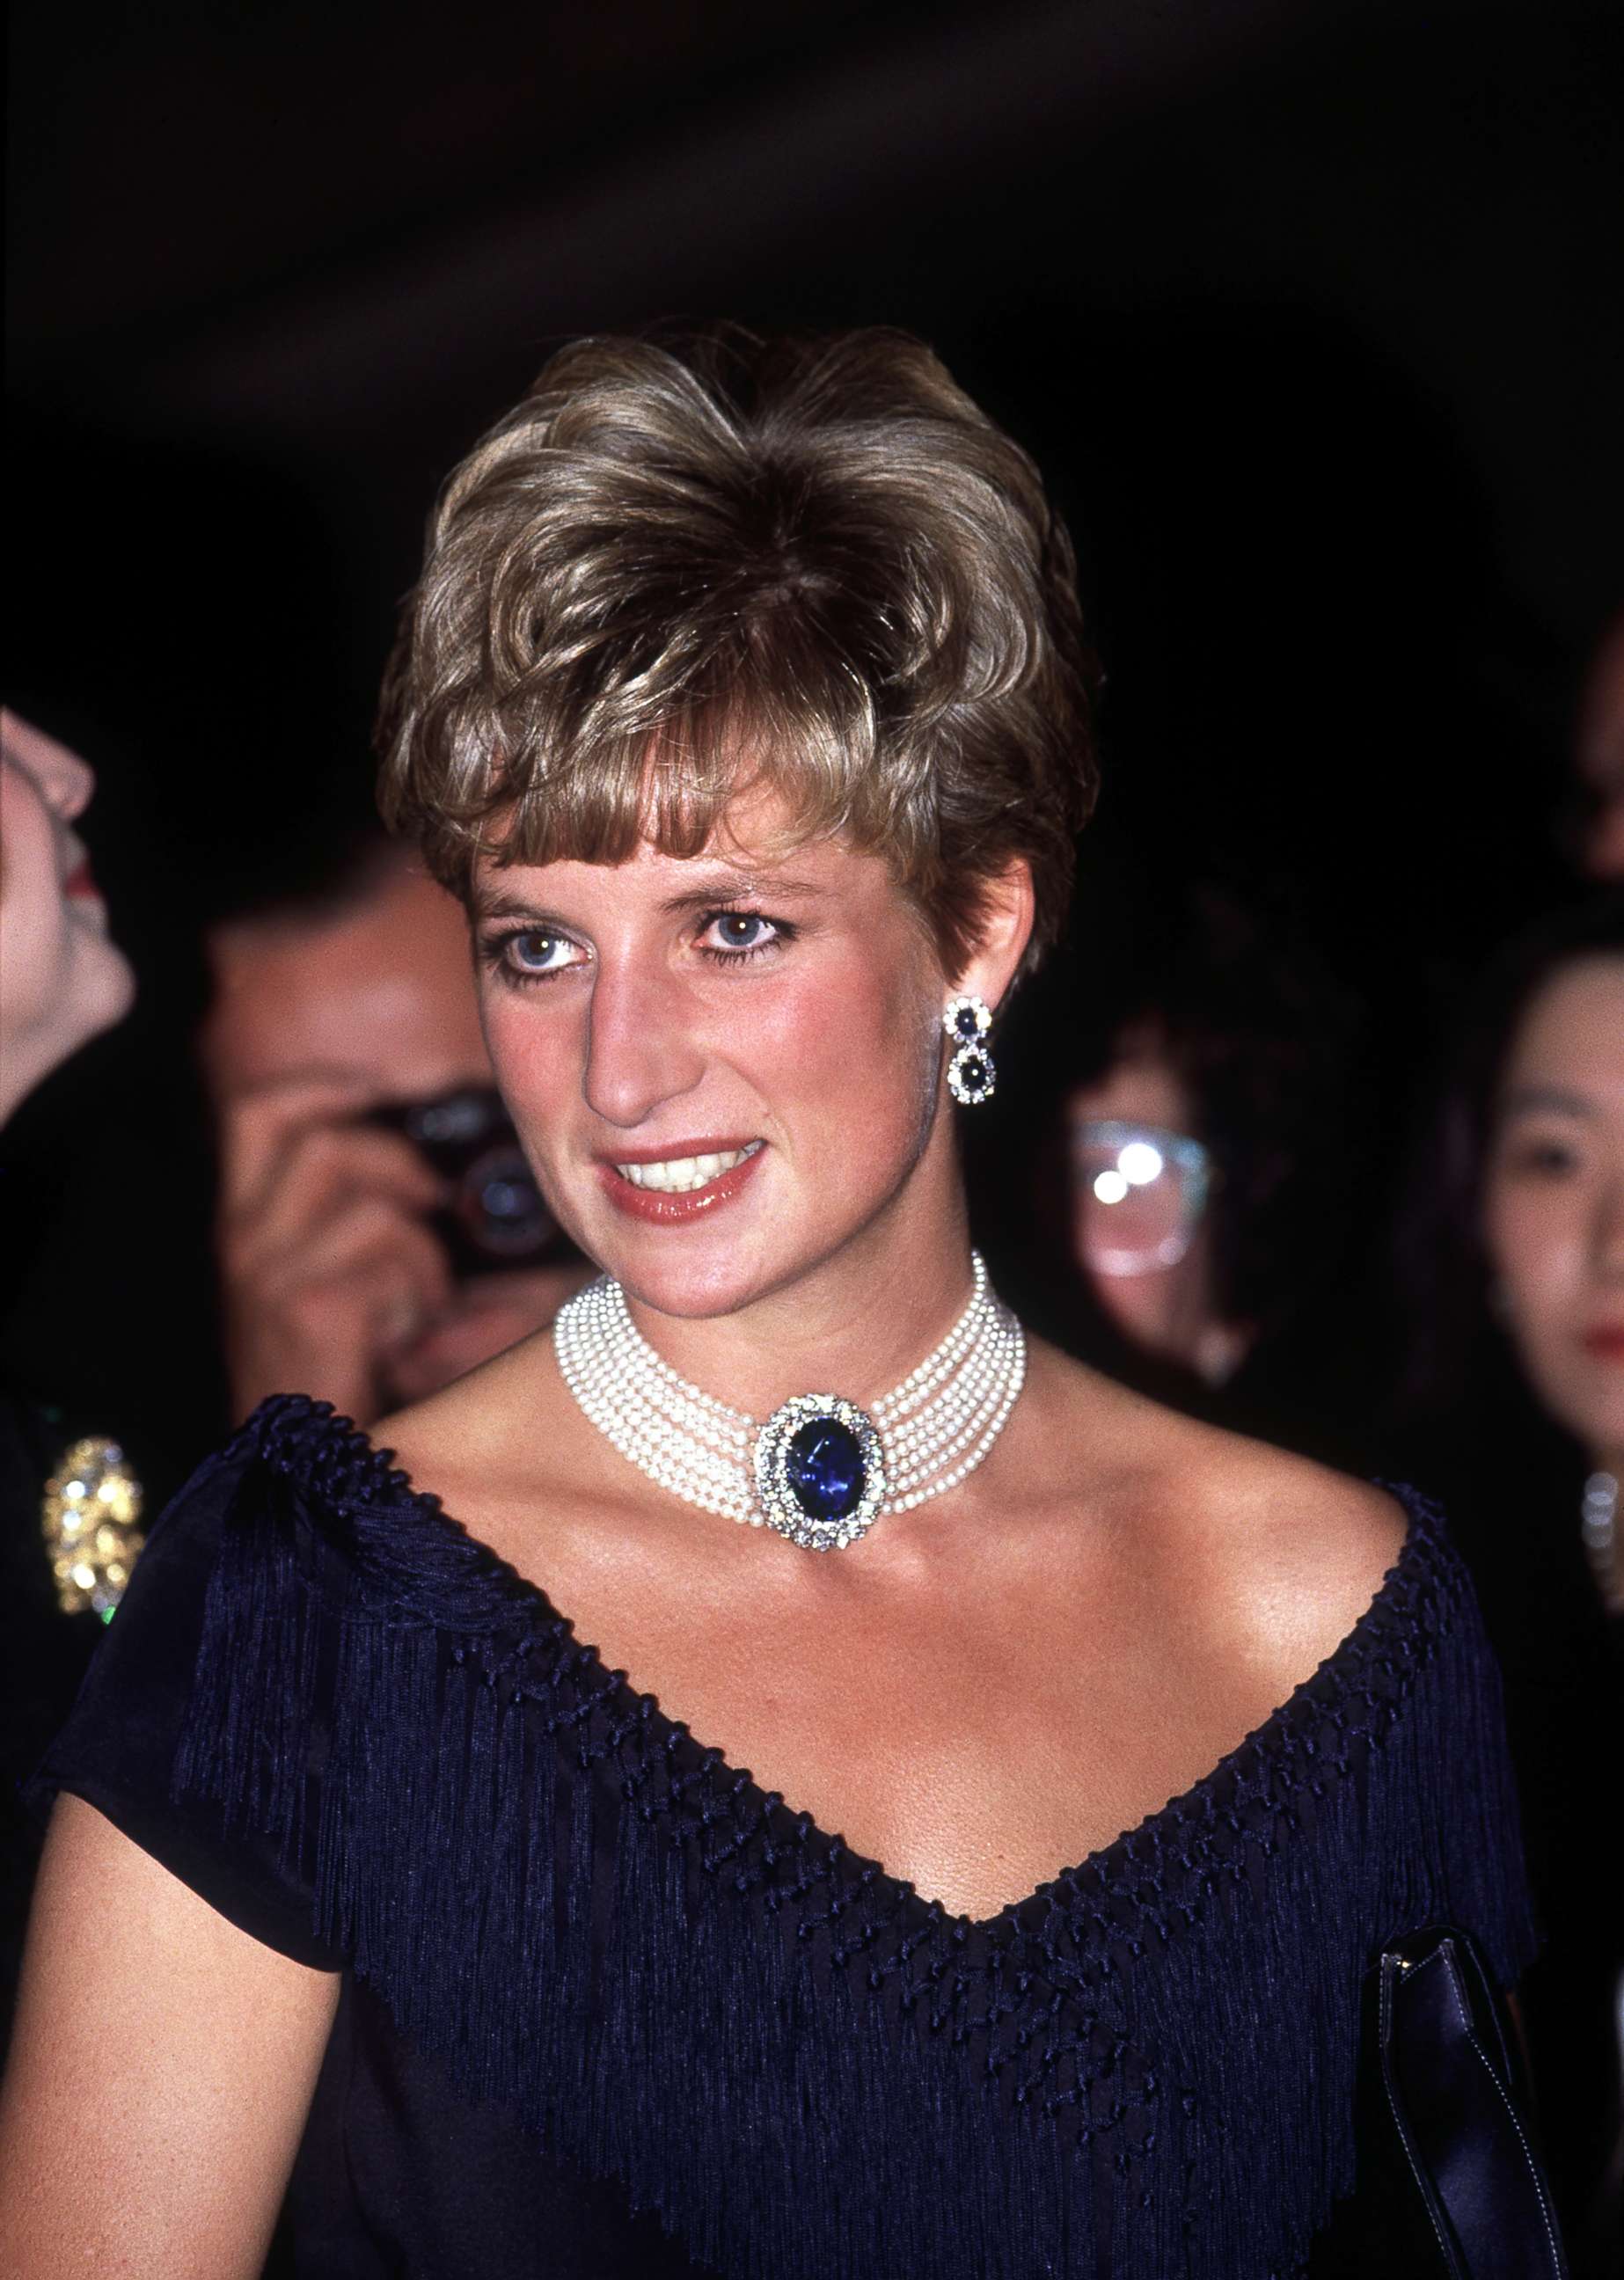 PHOTO: Diana, Princess of Wales, visits the National Arts Centre in Ottawa, October 1991. She is wearing a pearl and sapphire choker. 